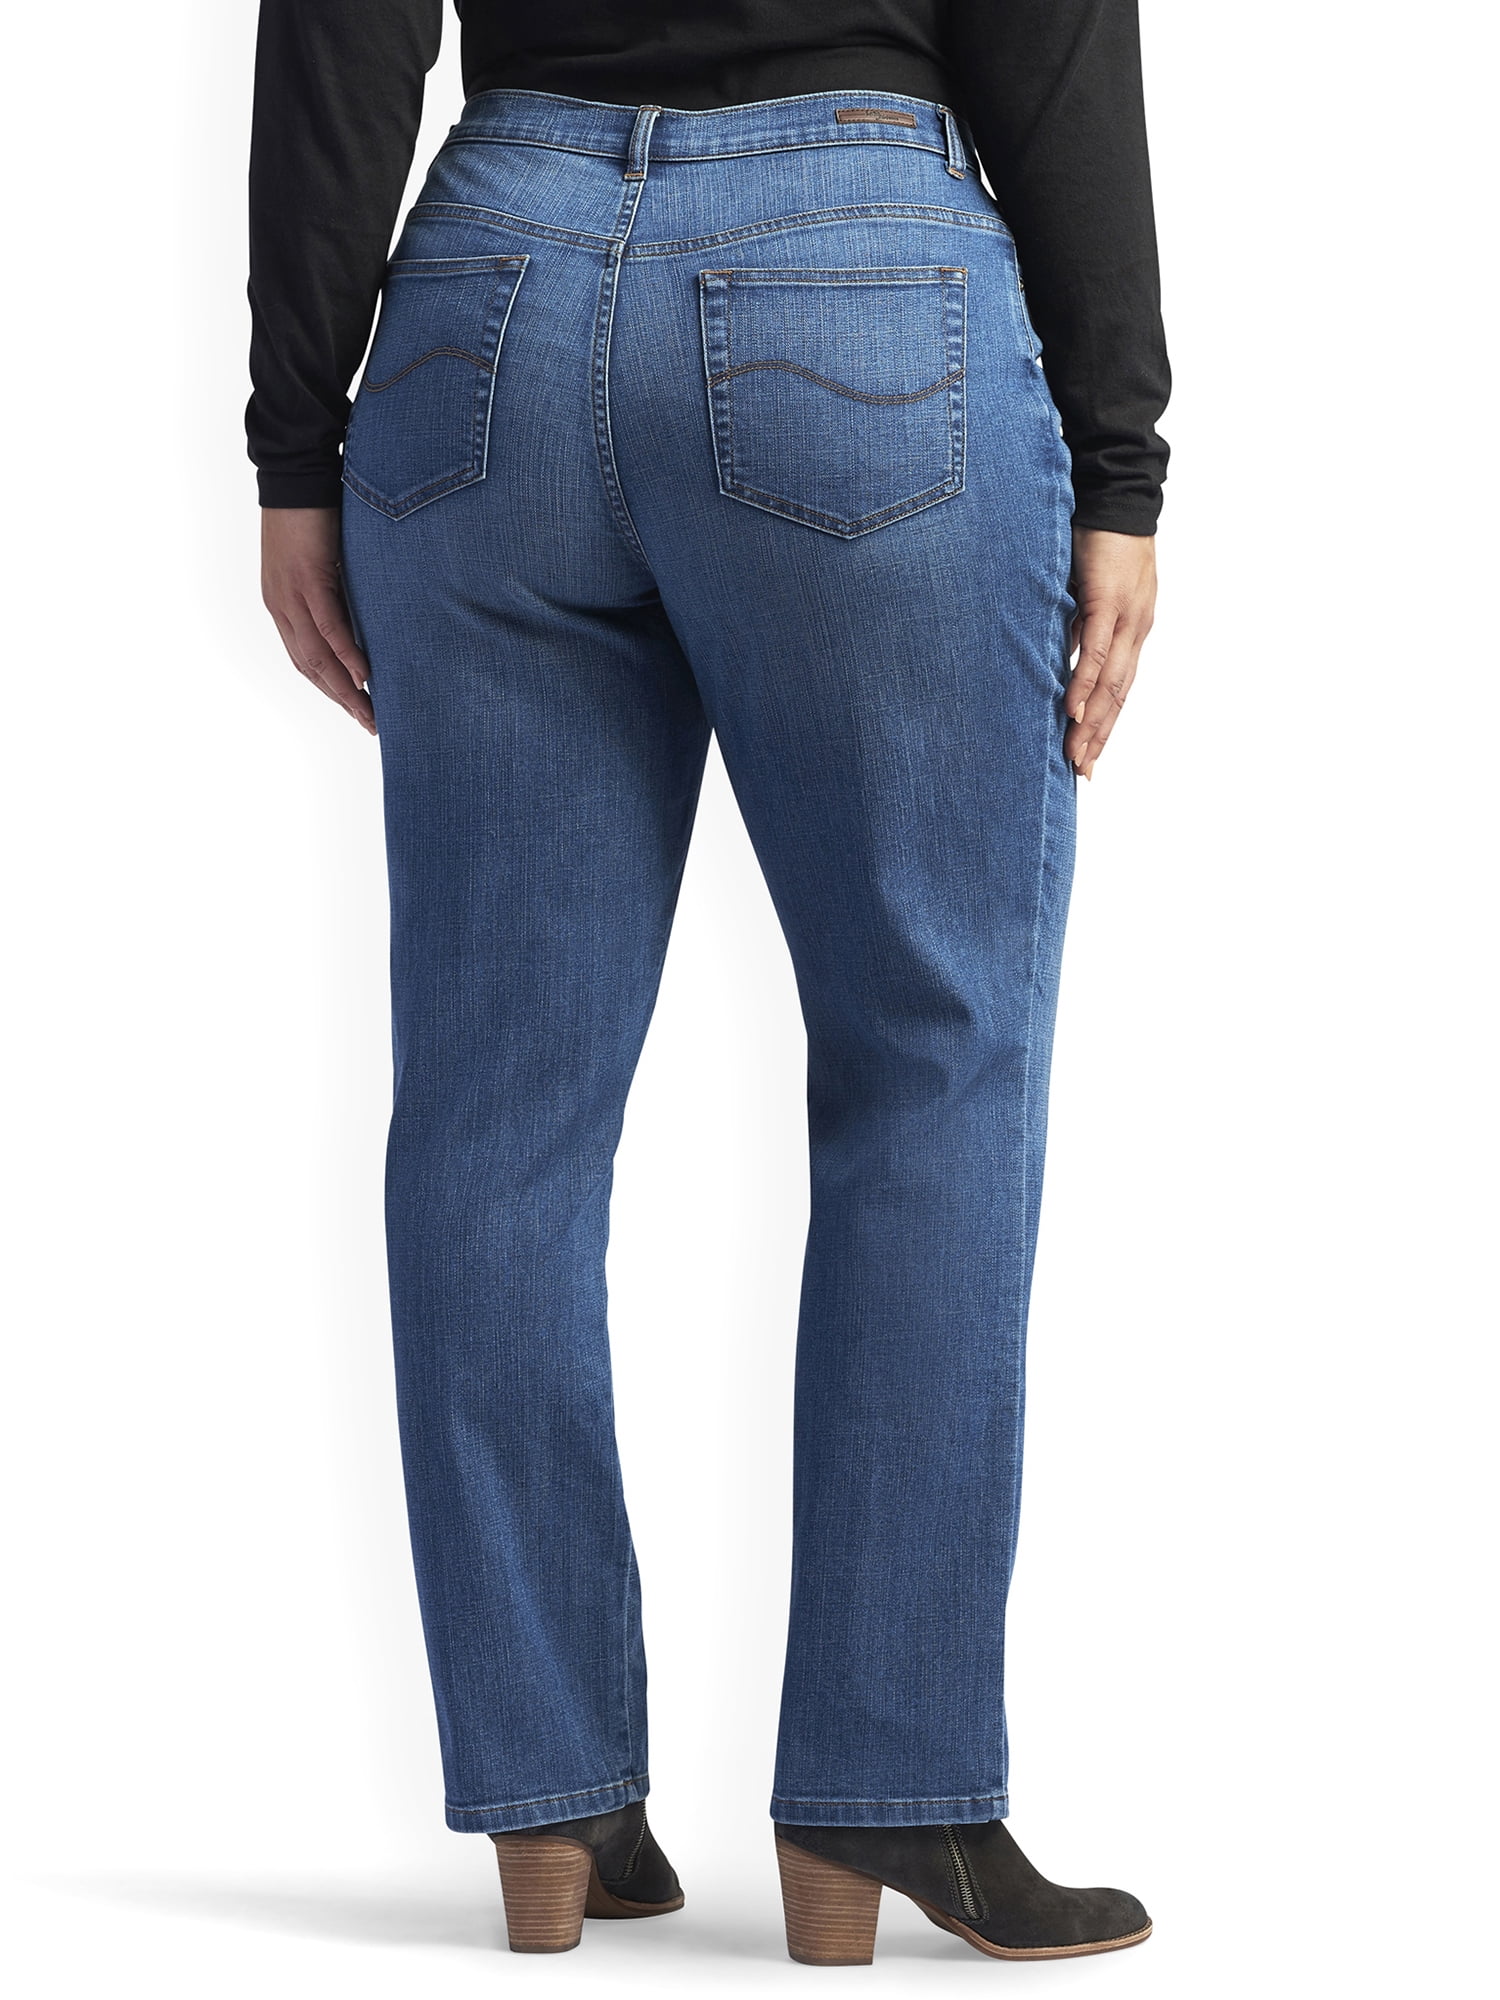 lees womens stretch jeans